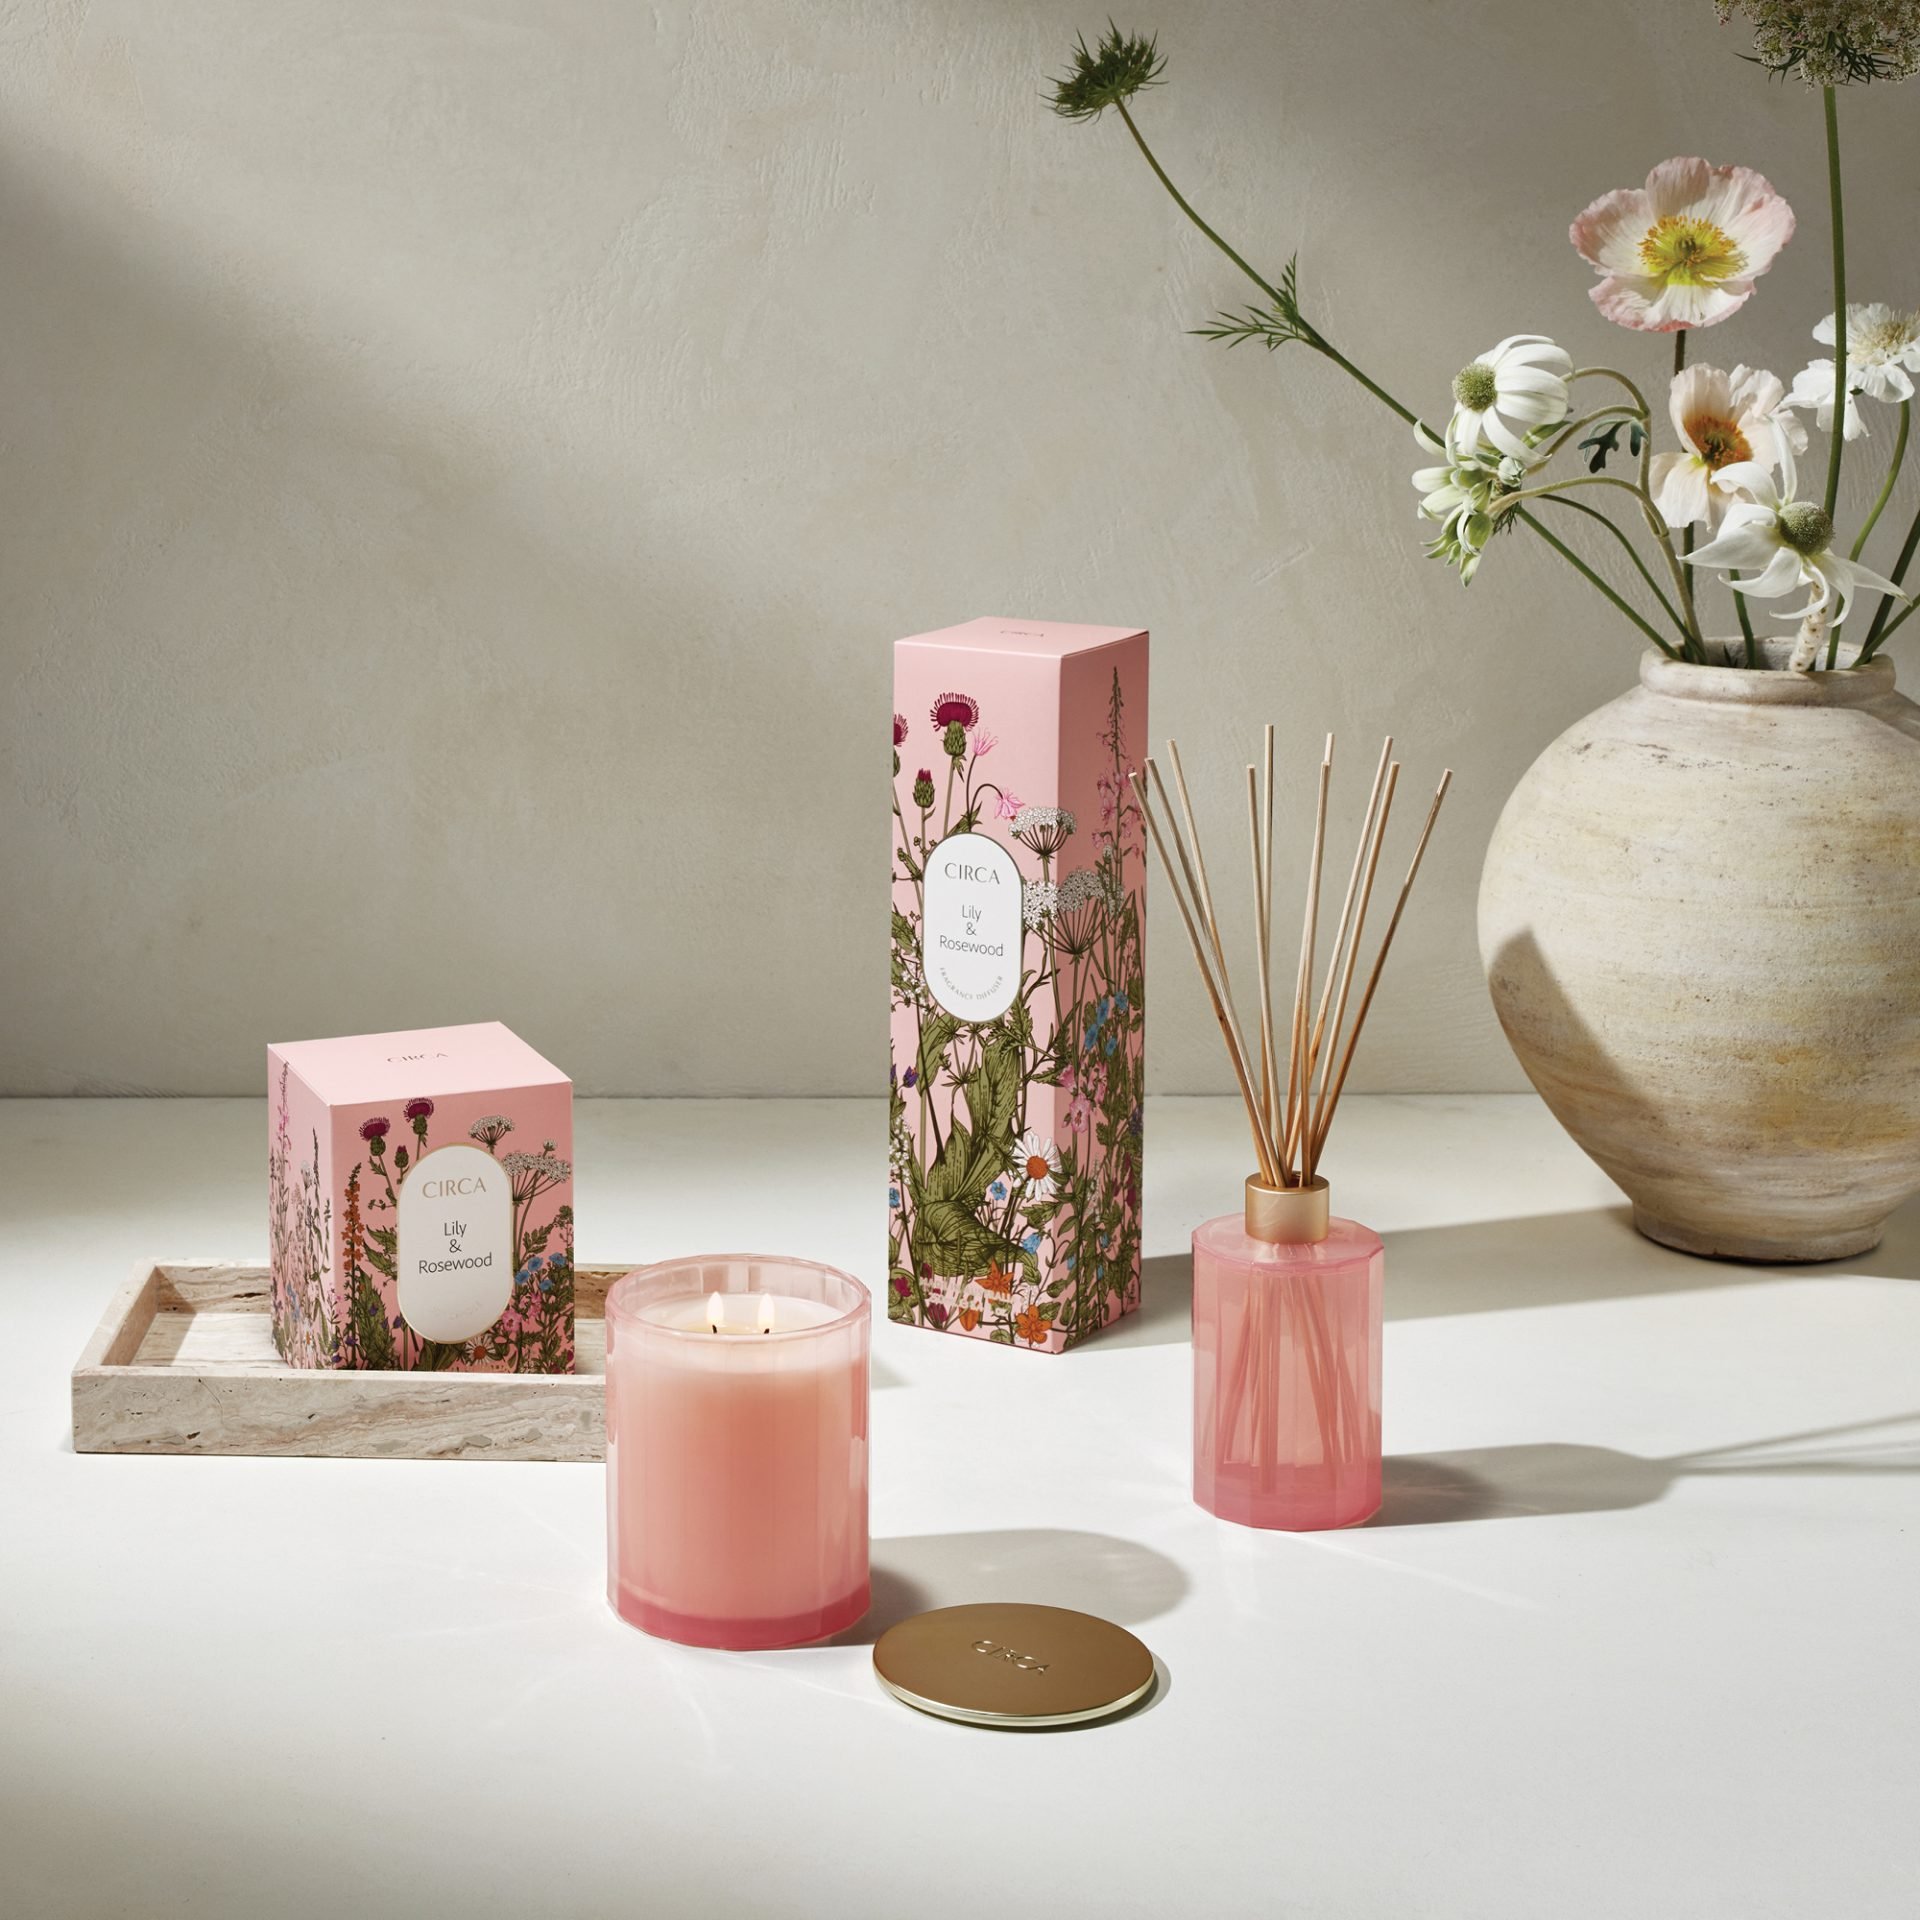 Our editor can’t stop raving about CIRCA home fragrance products – here’s why 2